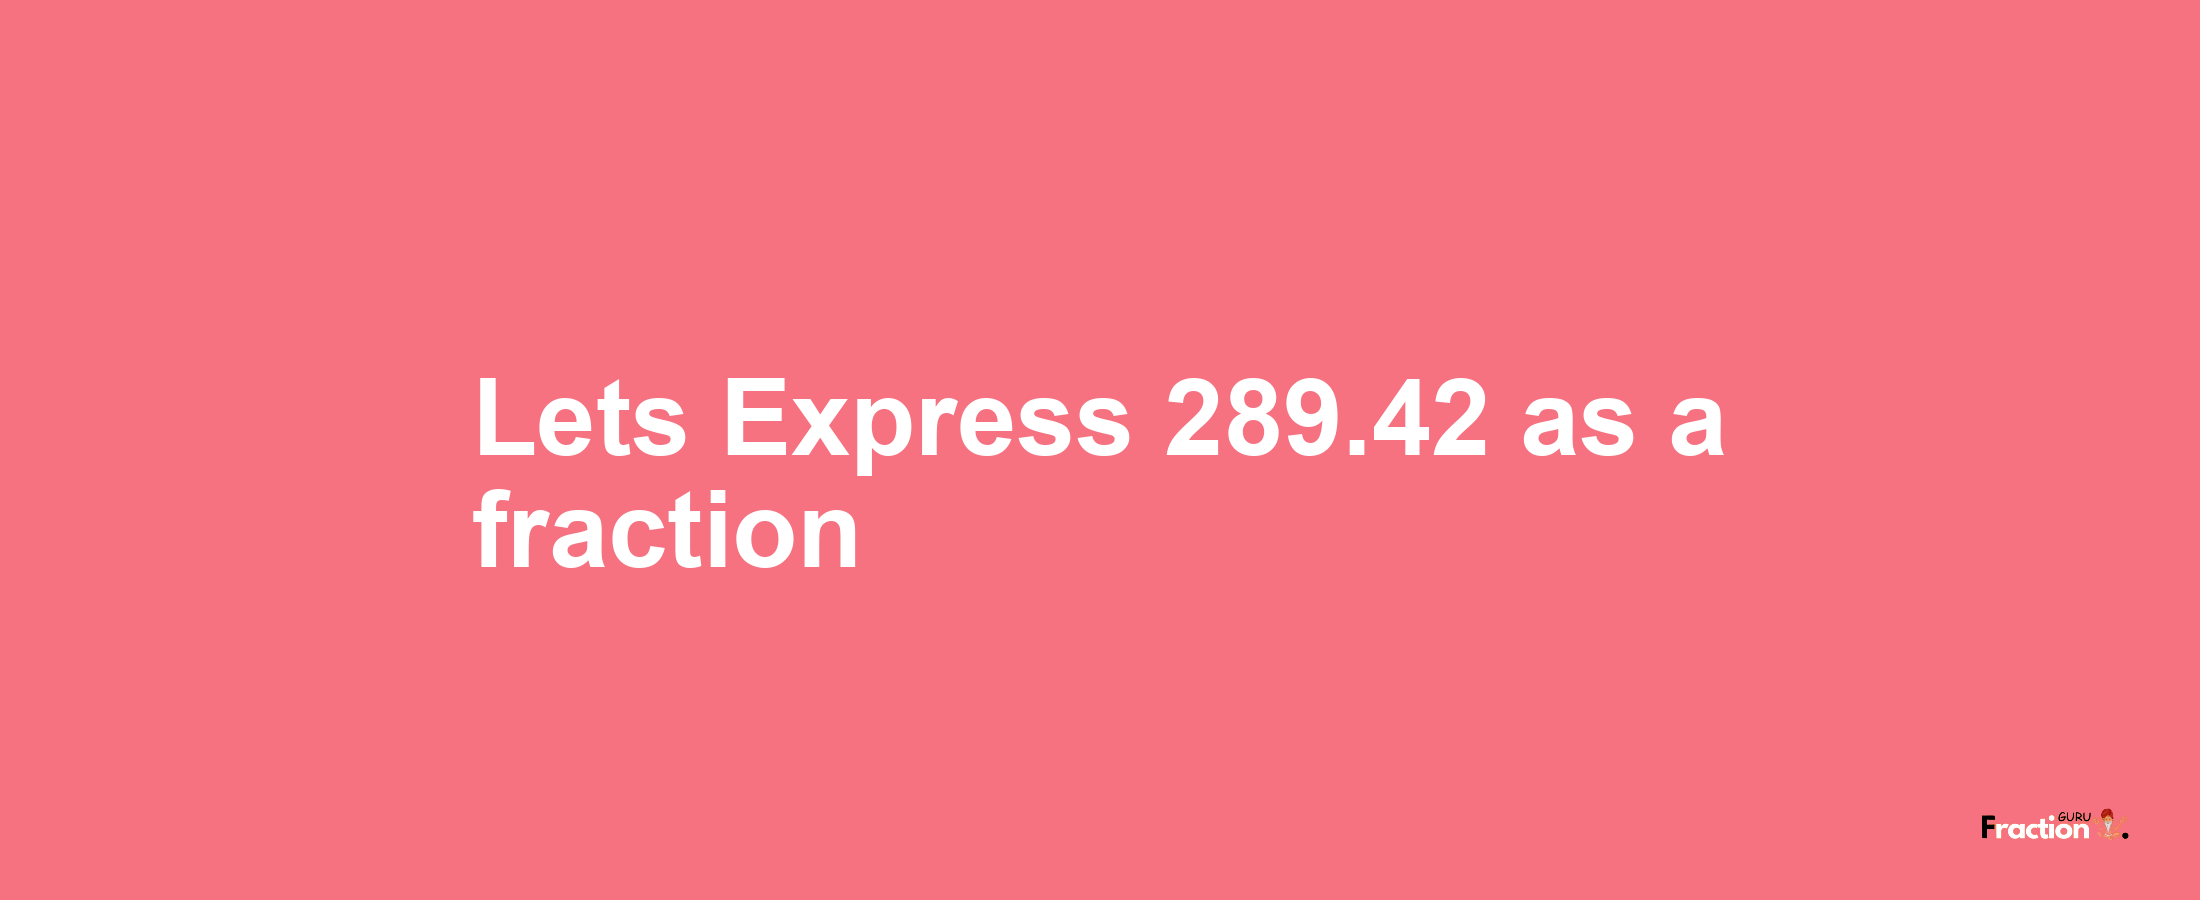 Lets Express 289.42 as afraction